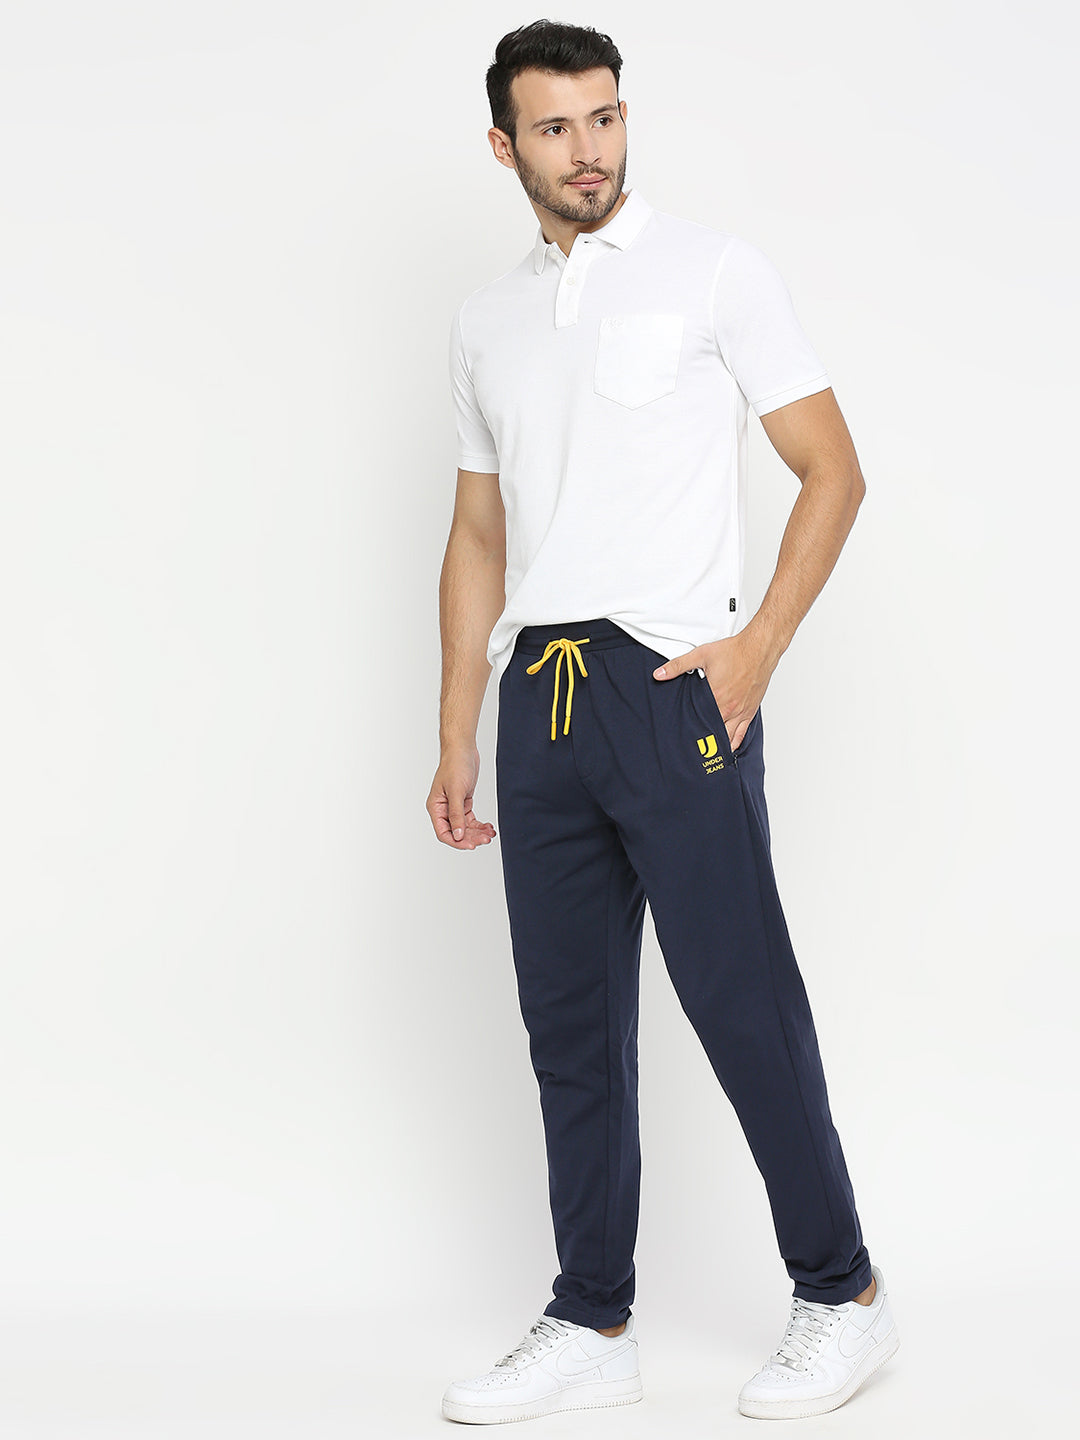 Men Premium Knitted Navy Cotton Trackpant - UnderJeans by Spykar